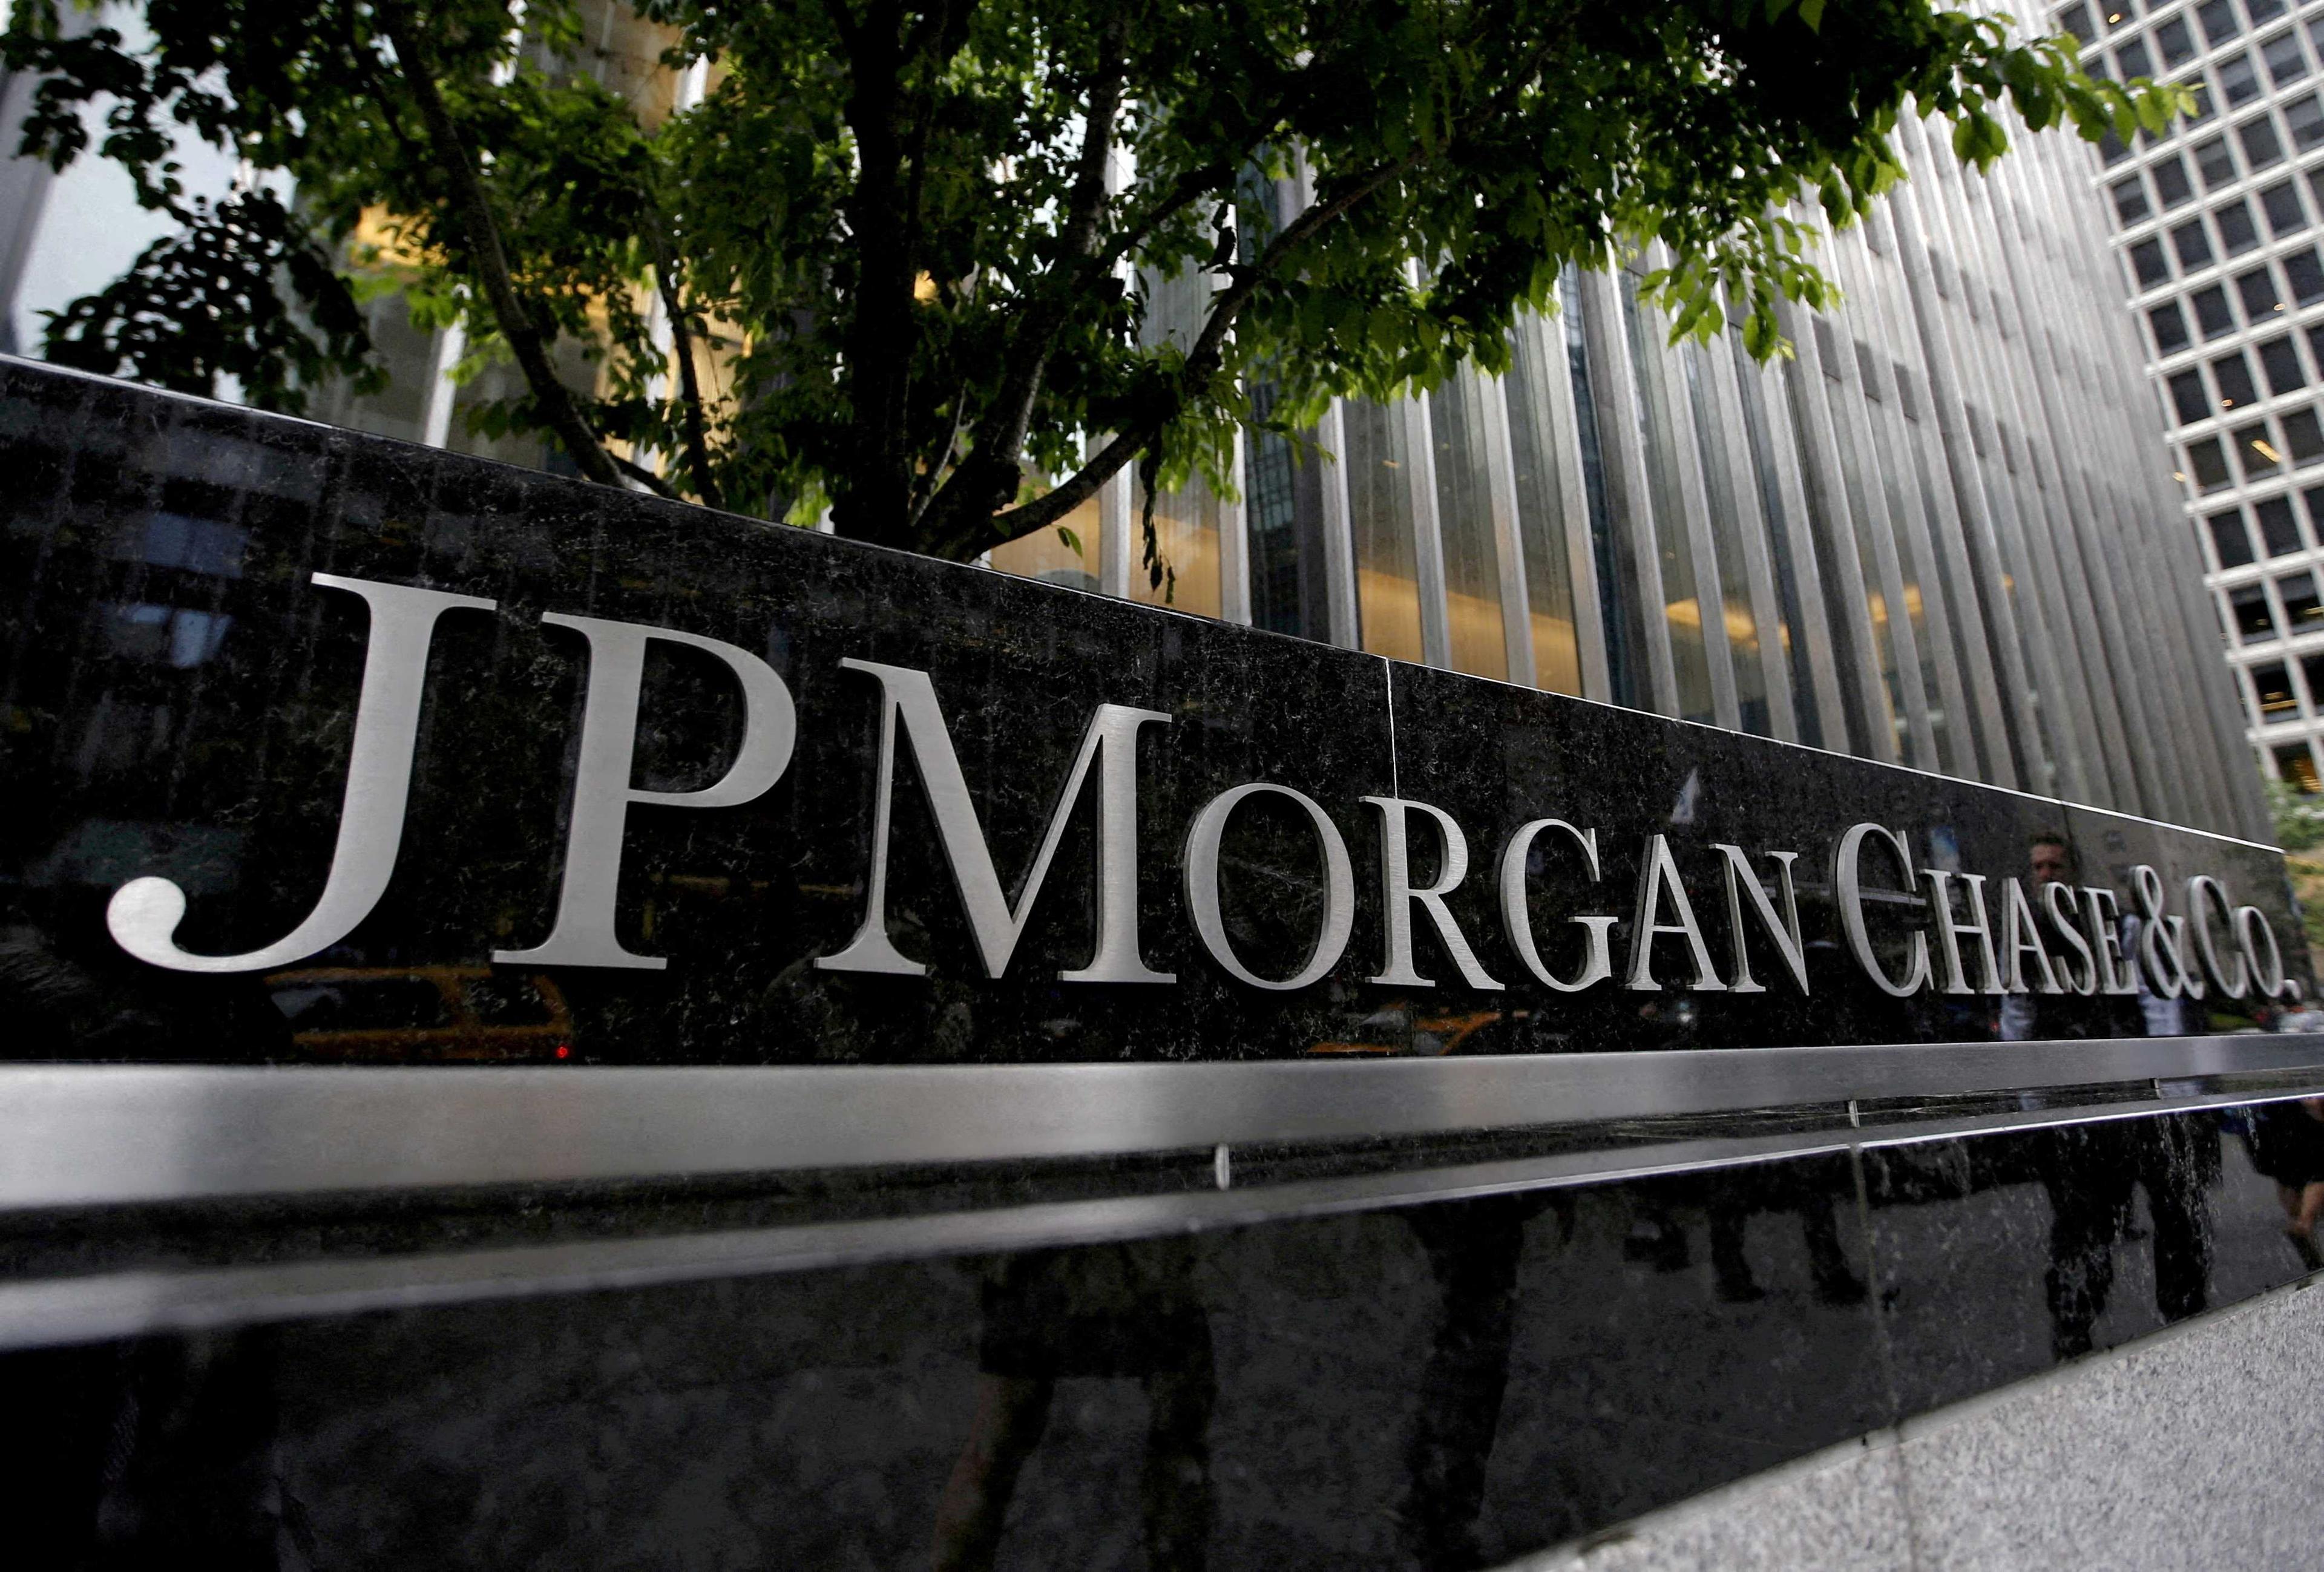 A view of the exterior of the JPMorgan Chase & Co corporate headquarters in New York City May 20, 2015. Photo: Reuters